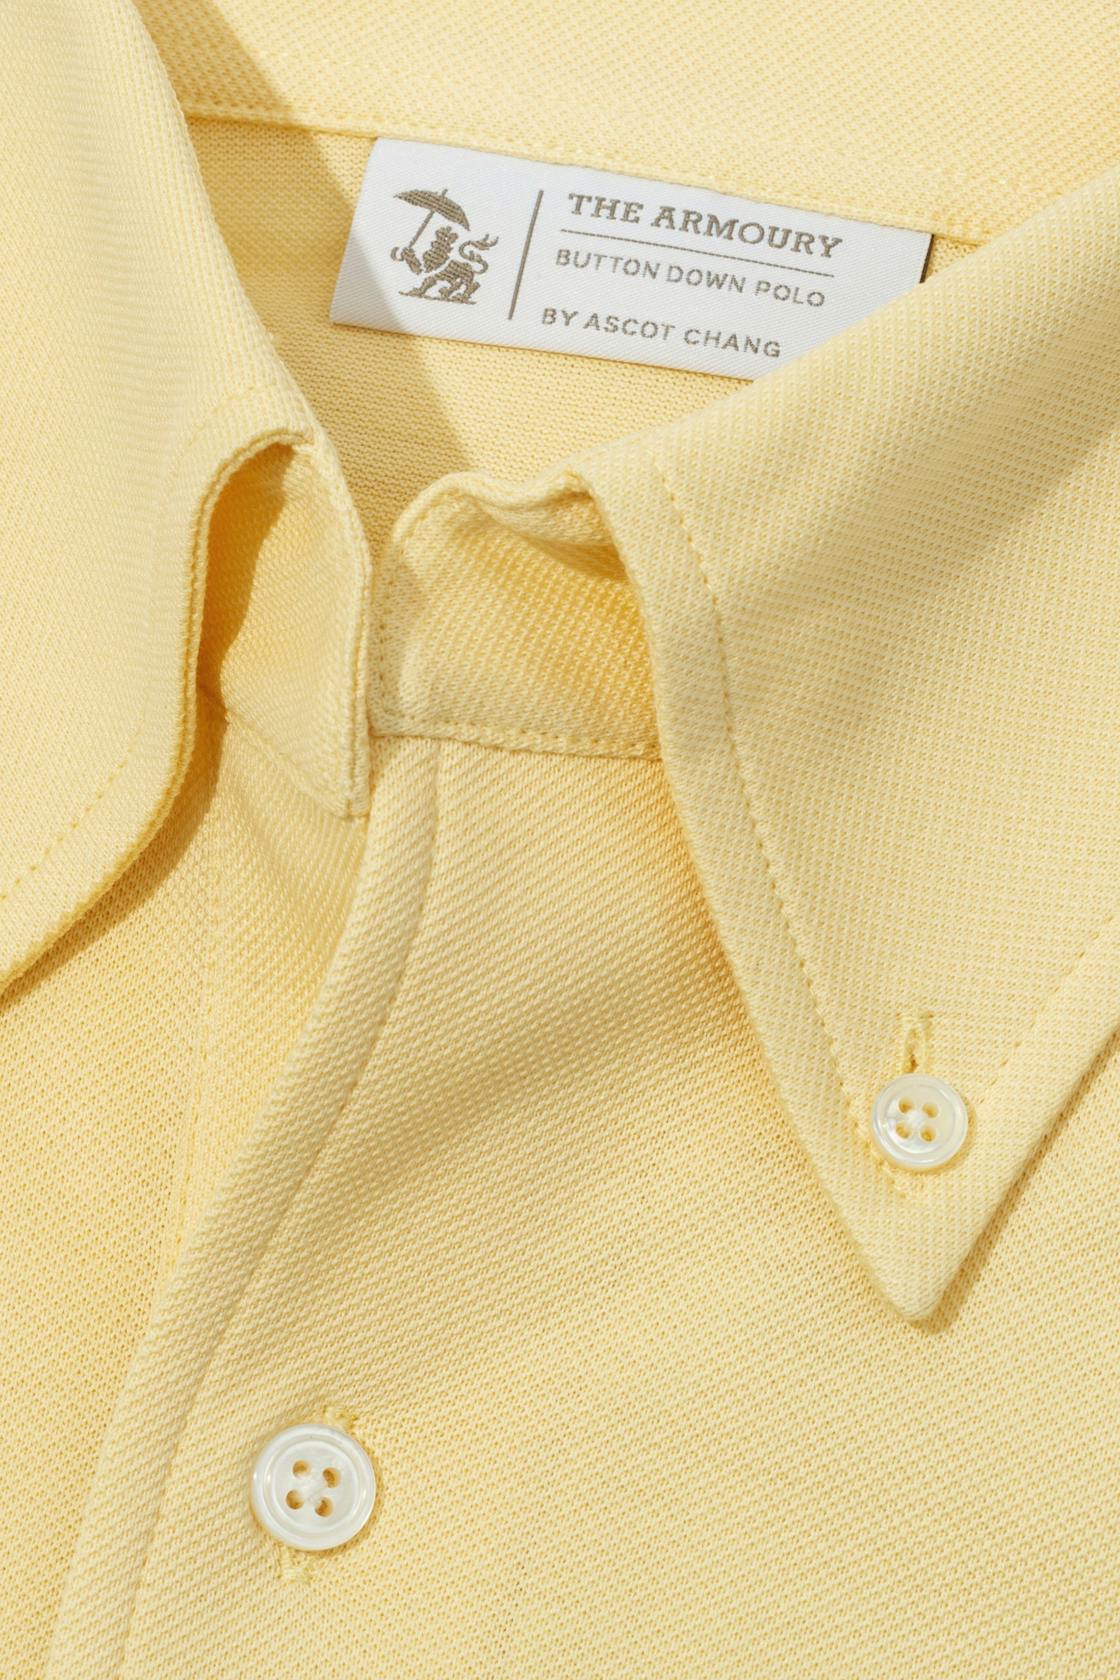 The Armoury by Ascot Chang Yellow Cotton Long Sleeve Button Down Polo